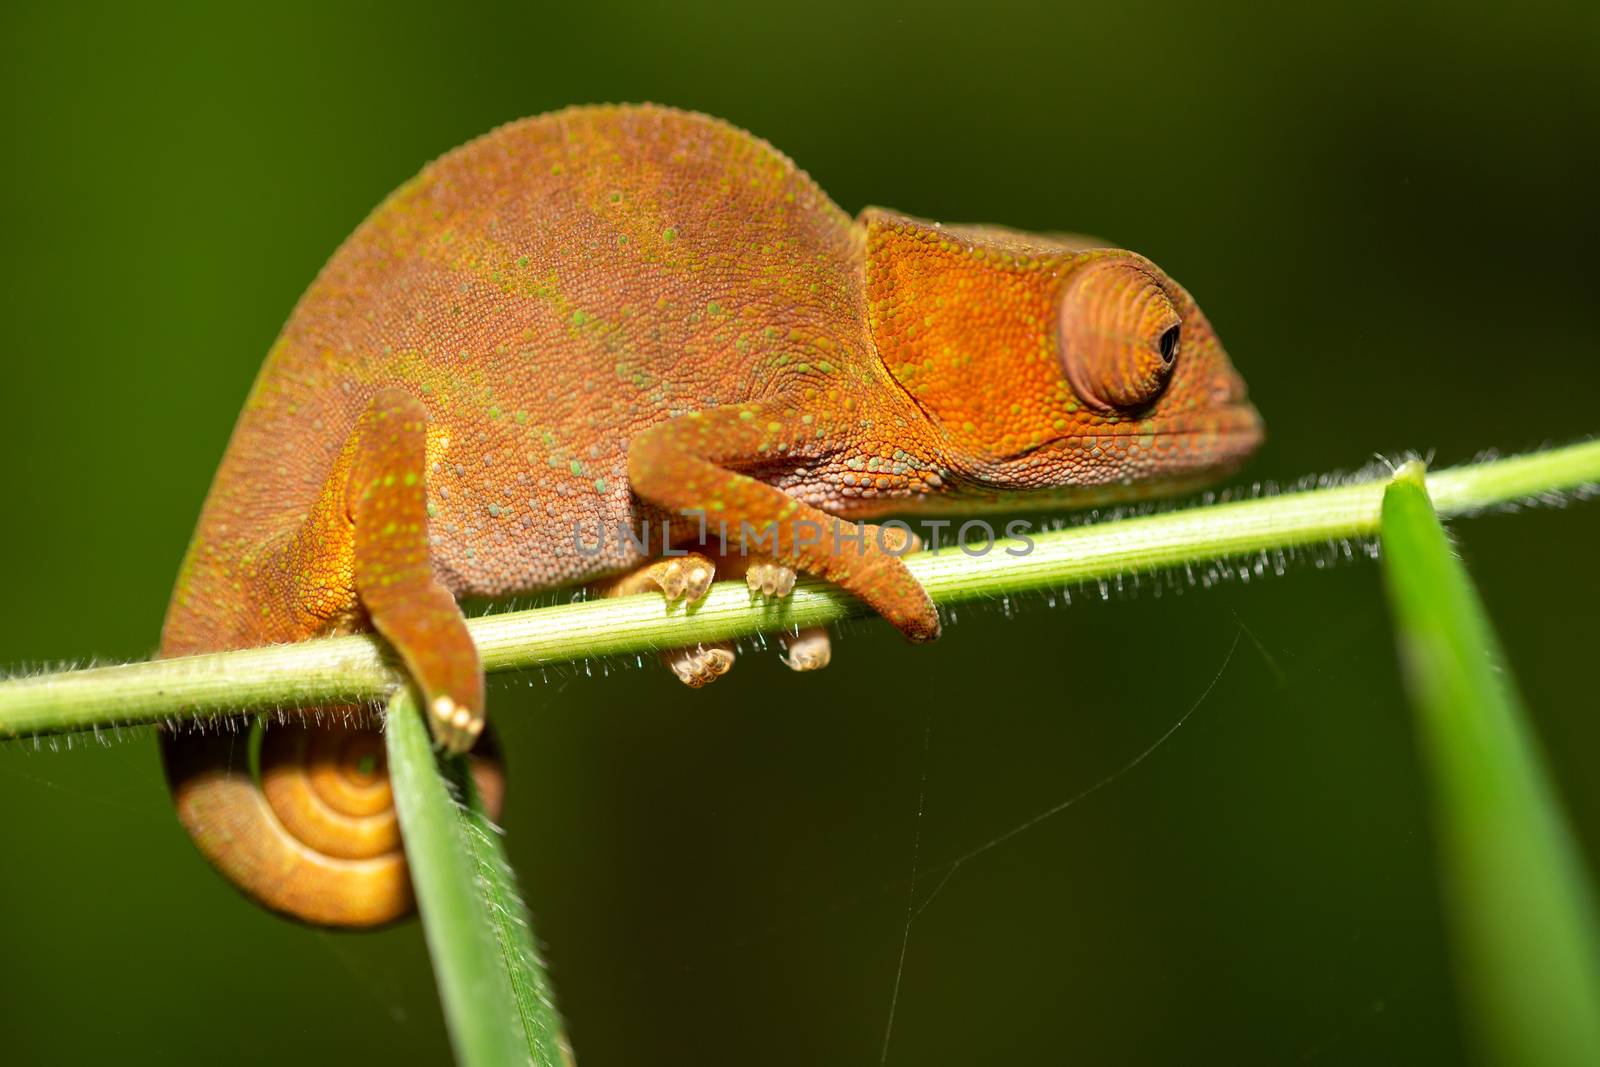 Colorful chameleon in a close-up in the rainforest in Madagascar by 25ehaag6